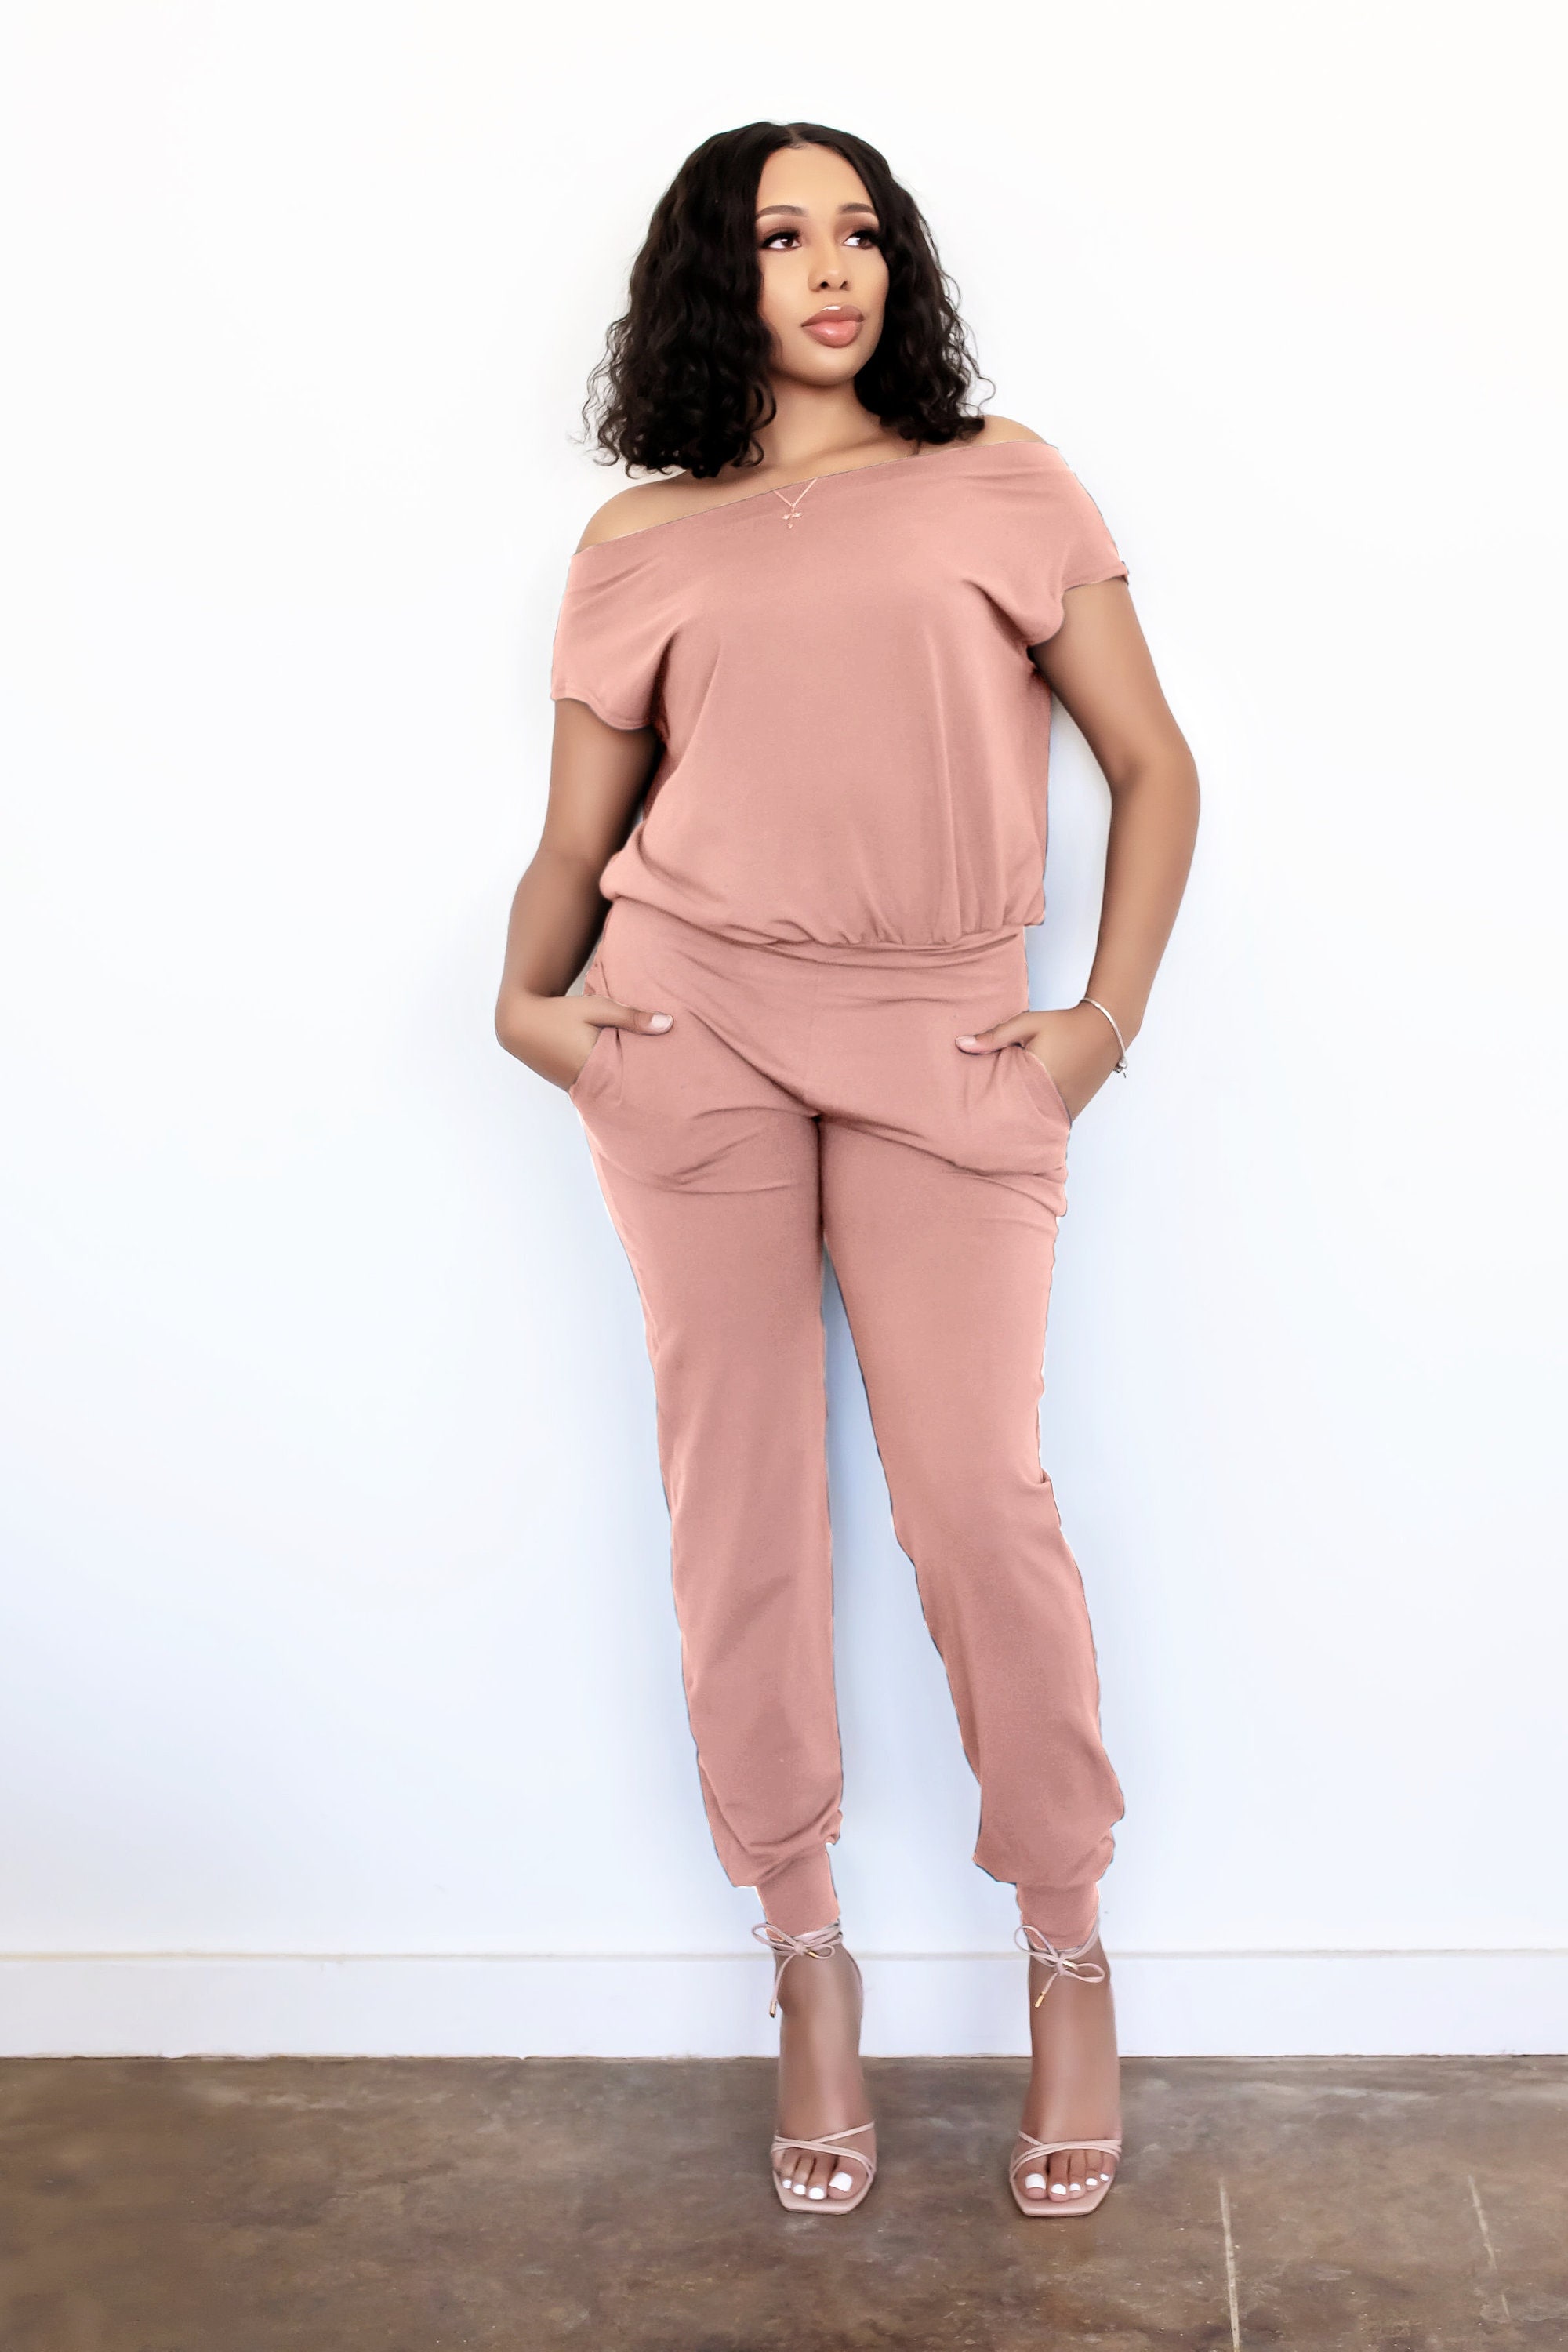 Cocoon Jumpsuit Drop Crotch Romper Over All Woman Romper Lounge Wear Bamboo  Clothing 